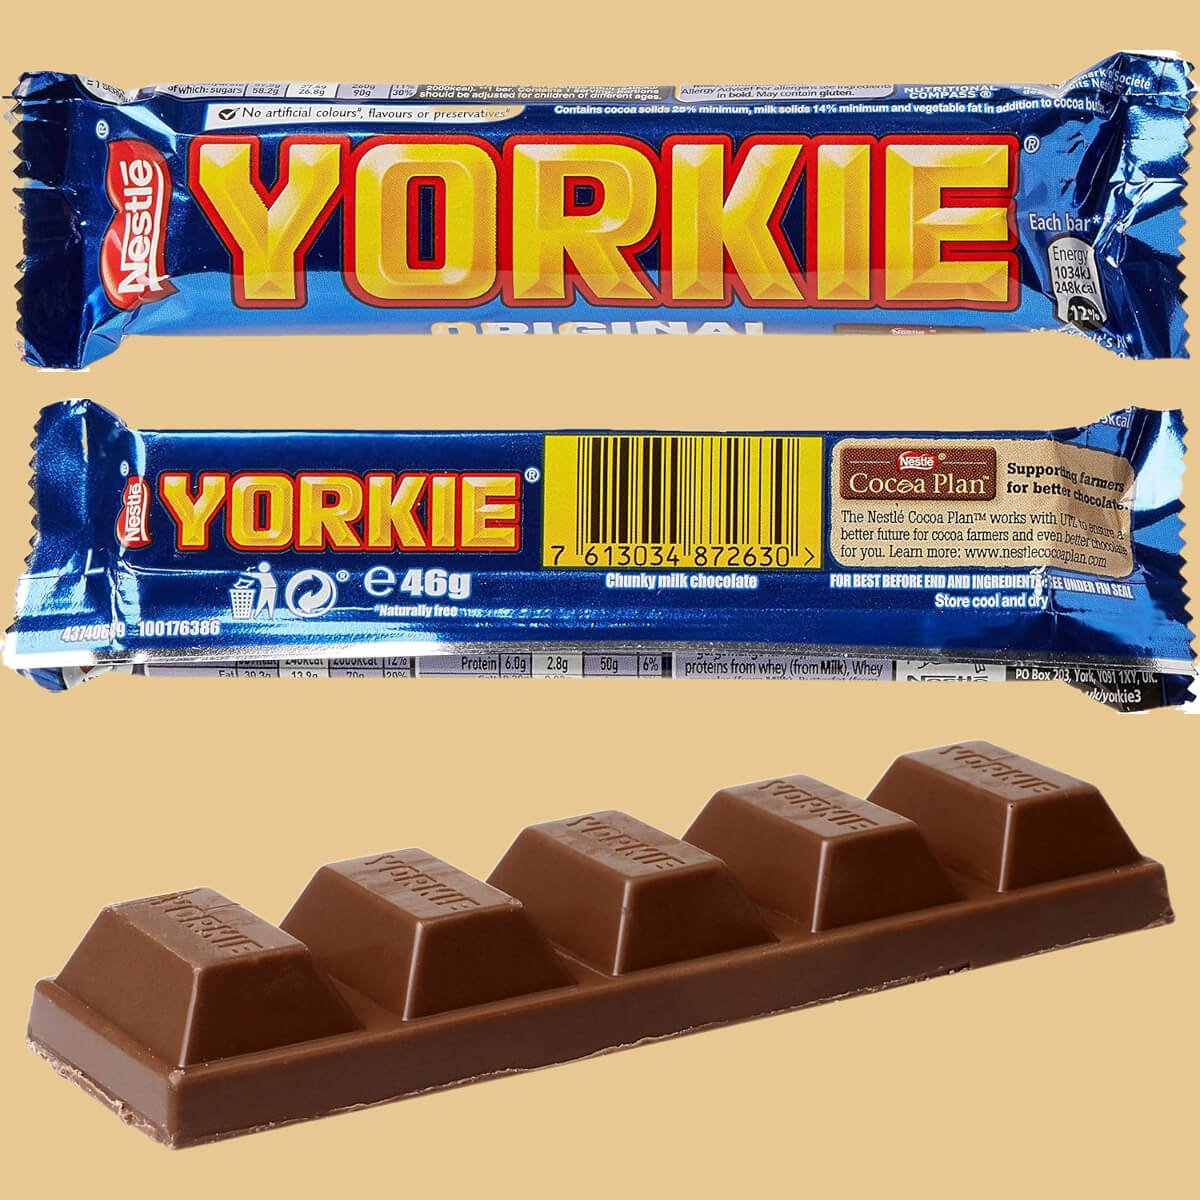 Yorkie chocolate bar in 2023, with and without wrapper.